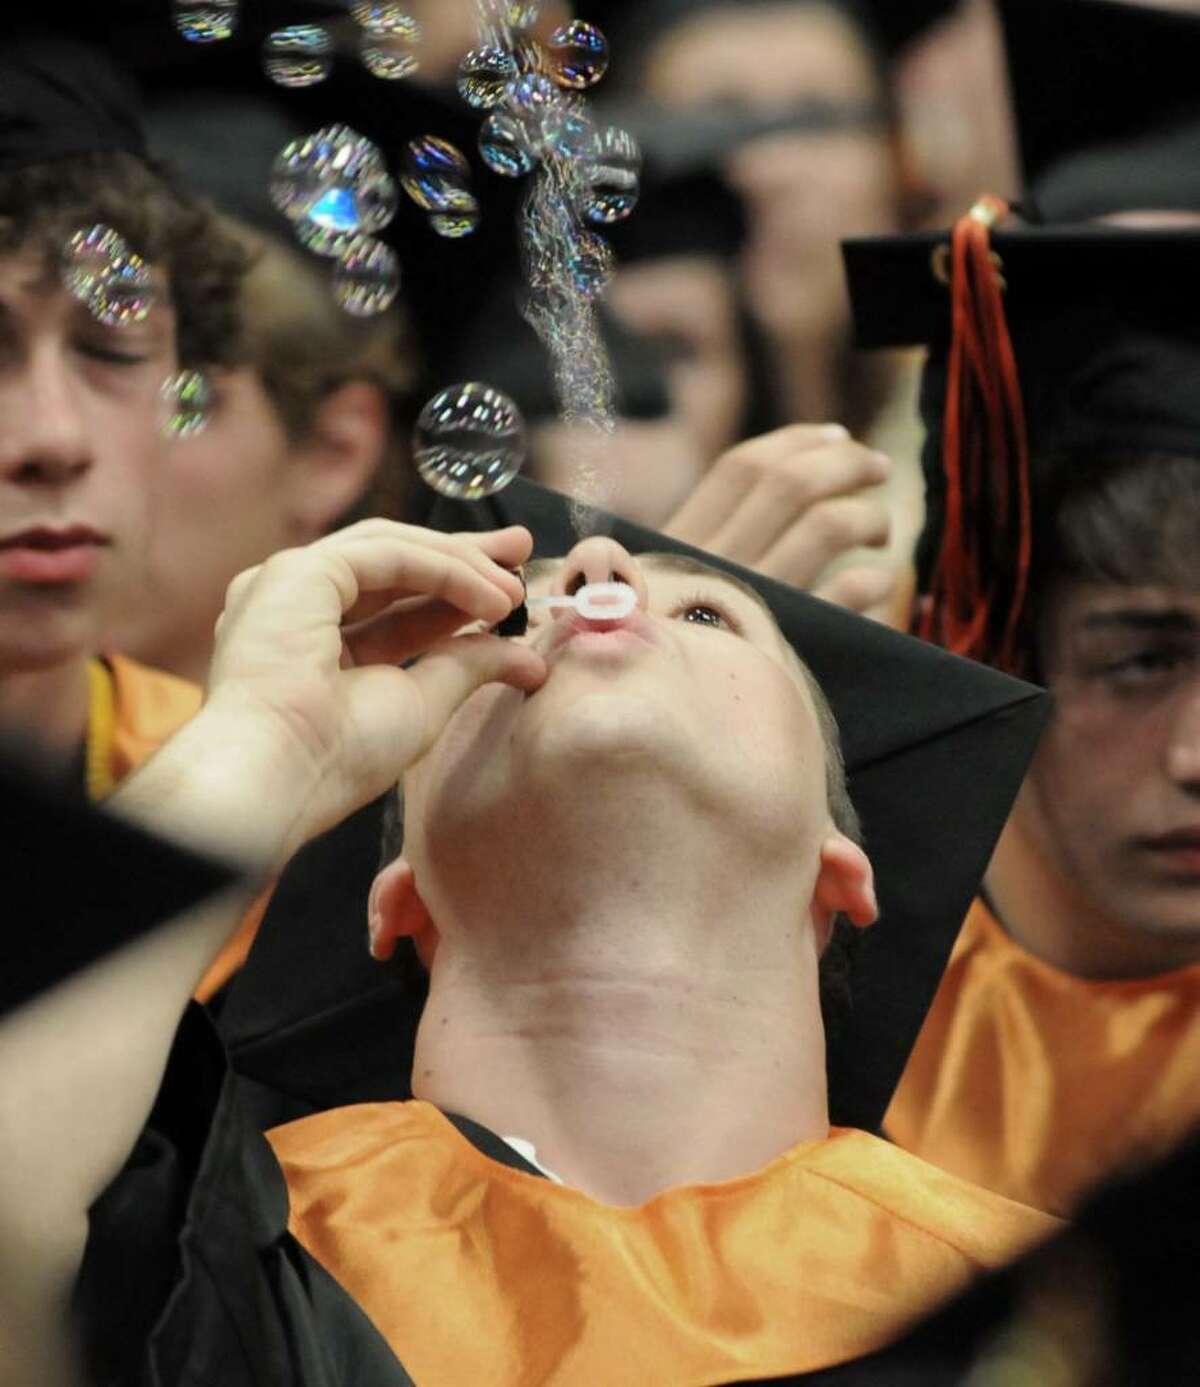 John Morrison, a Ridgefield High School graduate, blows bubbles while he waits for his turn to get his diploma. The graduation took place at the Western Connecticut State University's O'Neill Center on Friday June 25, 2010.